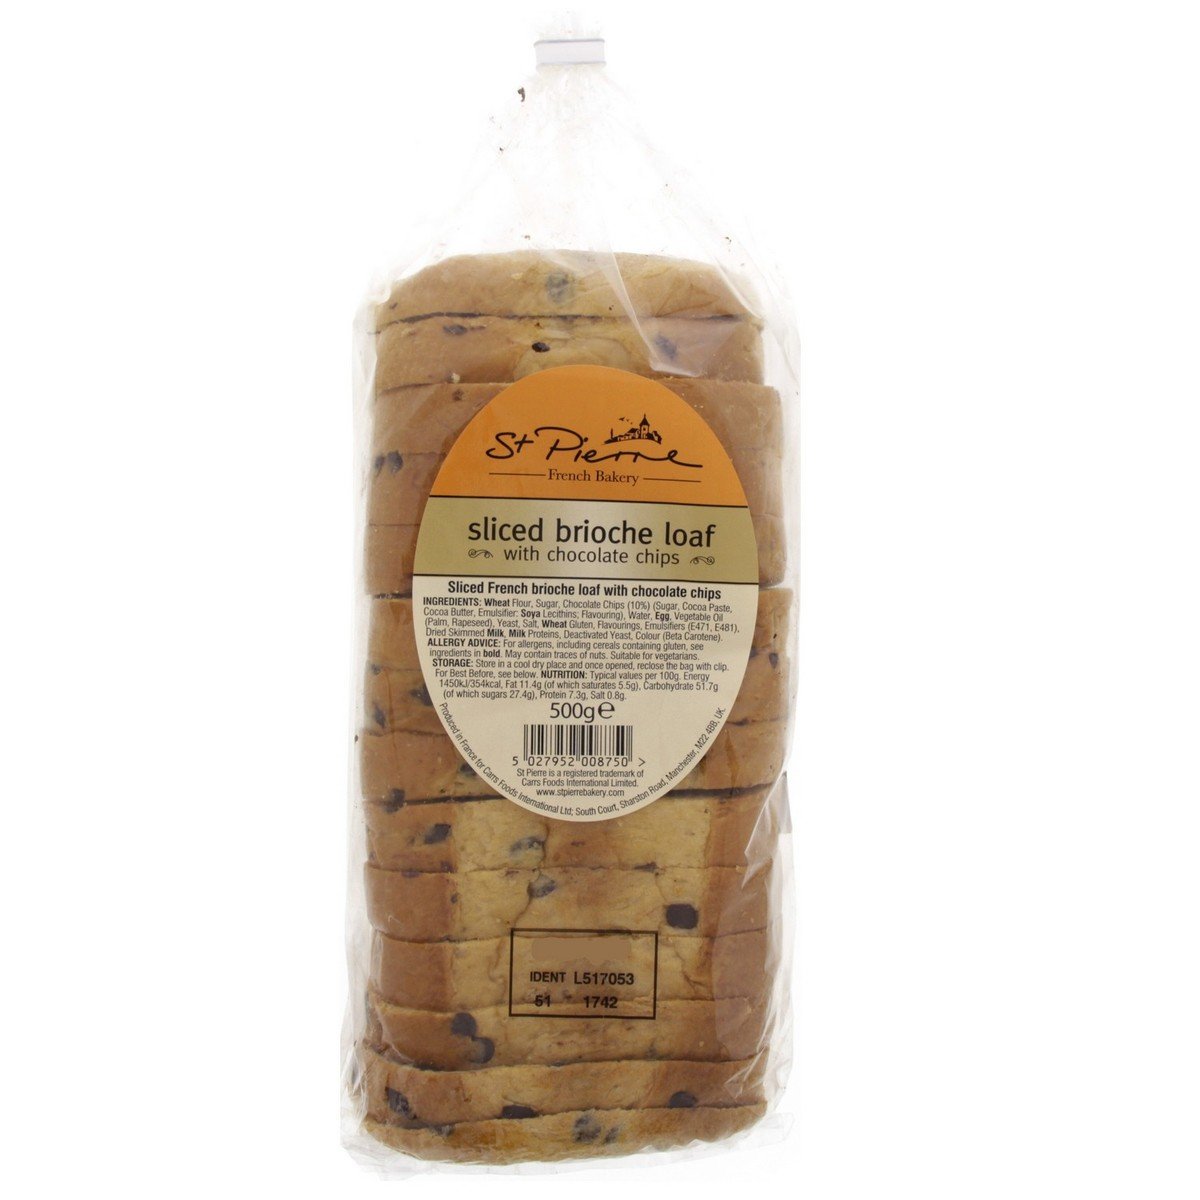 St Pierre Sliced French Brioche Loaf With Chocolate Chips 500g